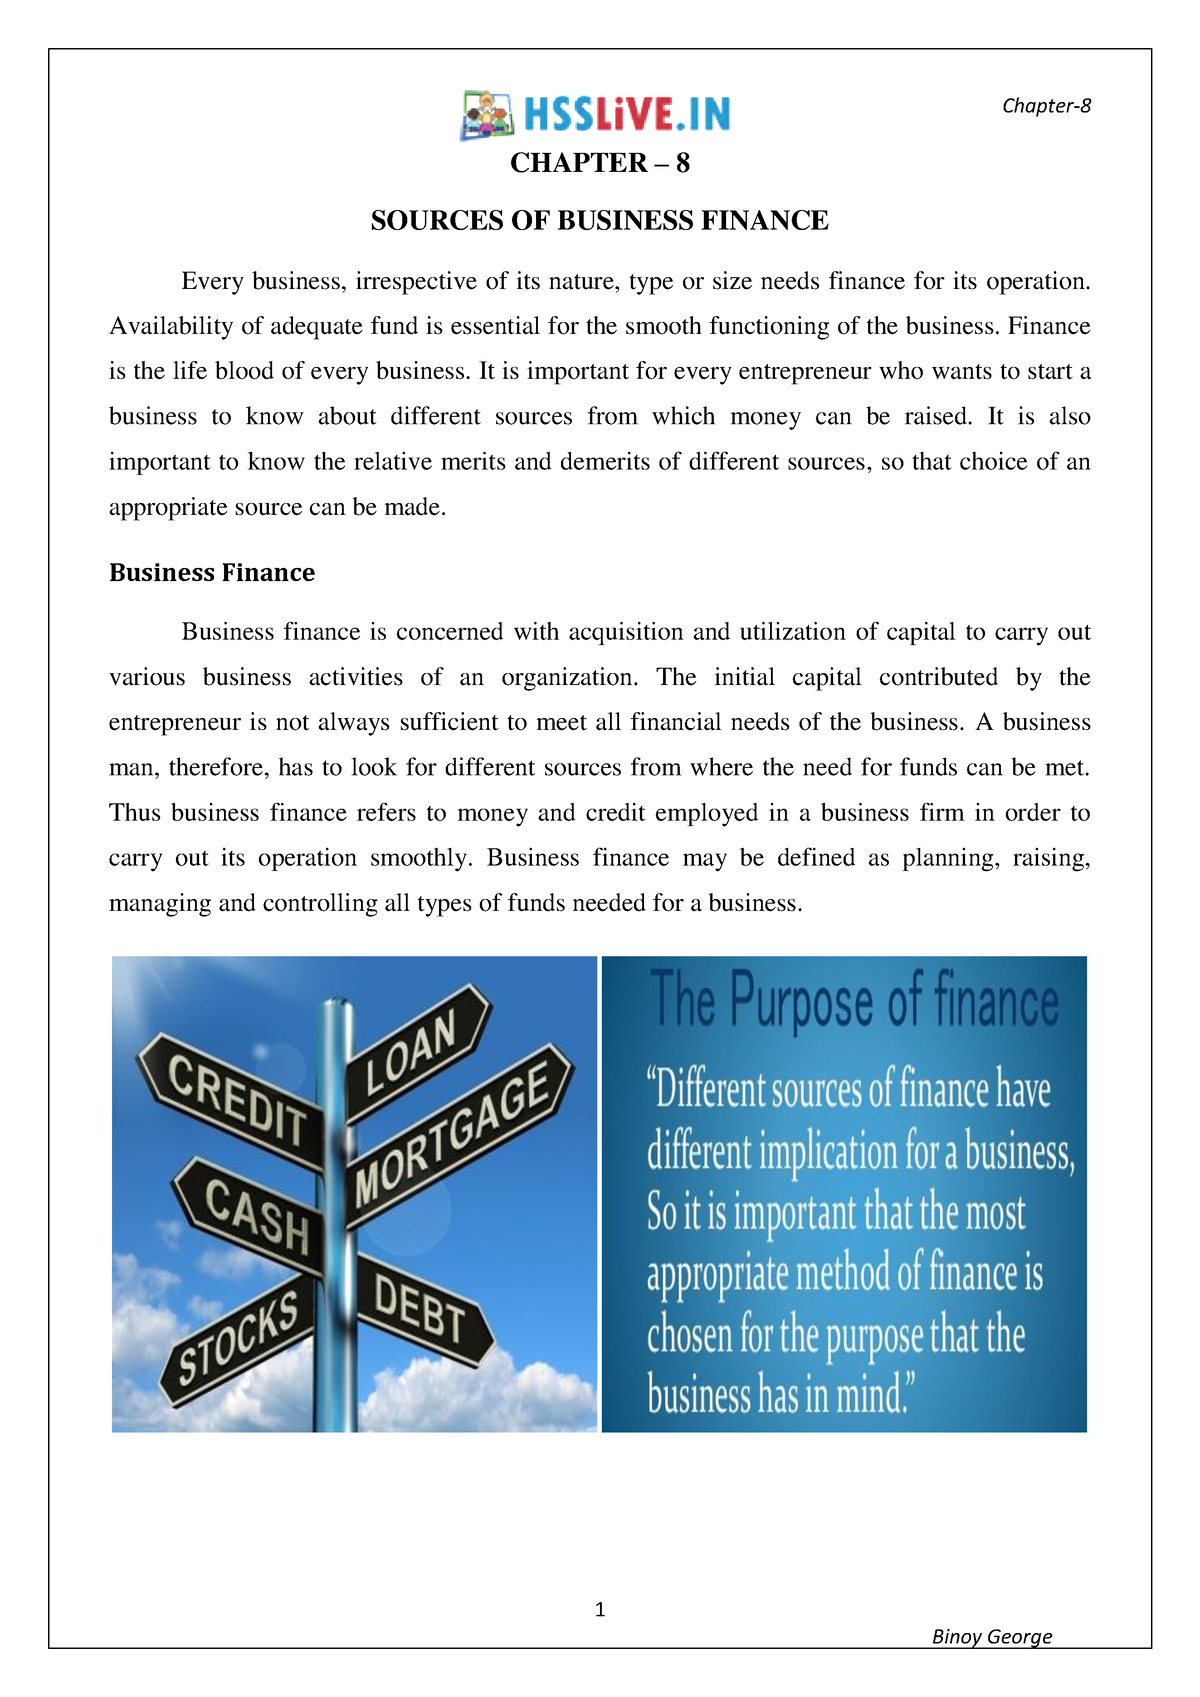 sources of business finance assignment